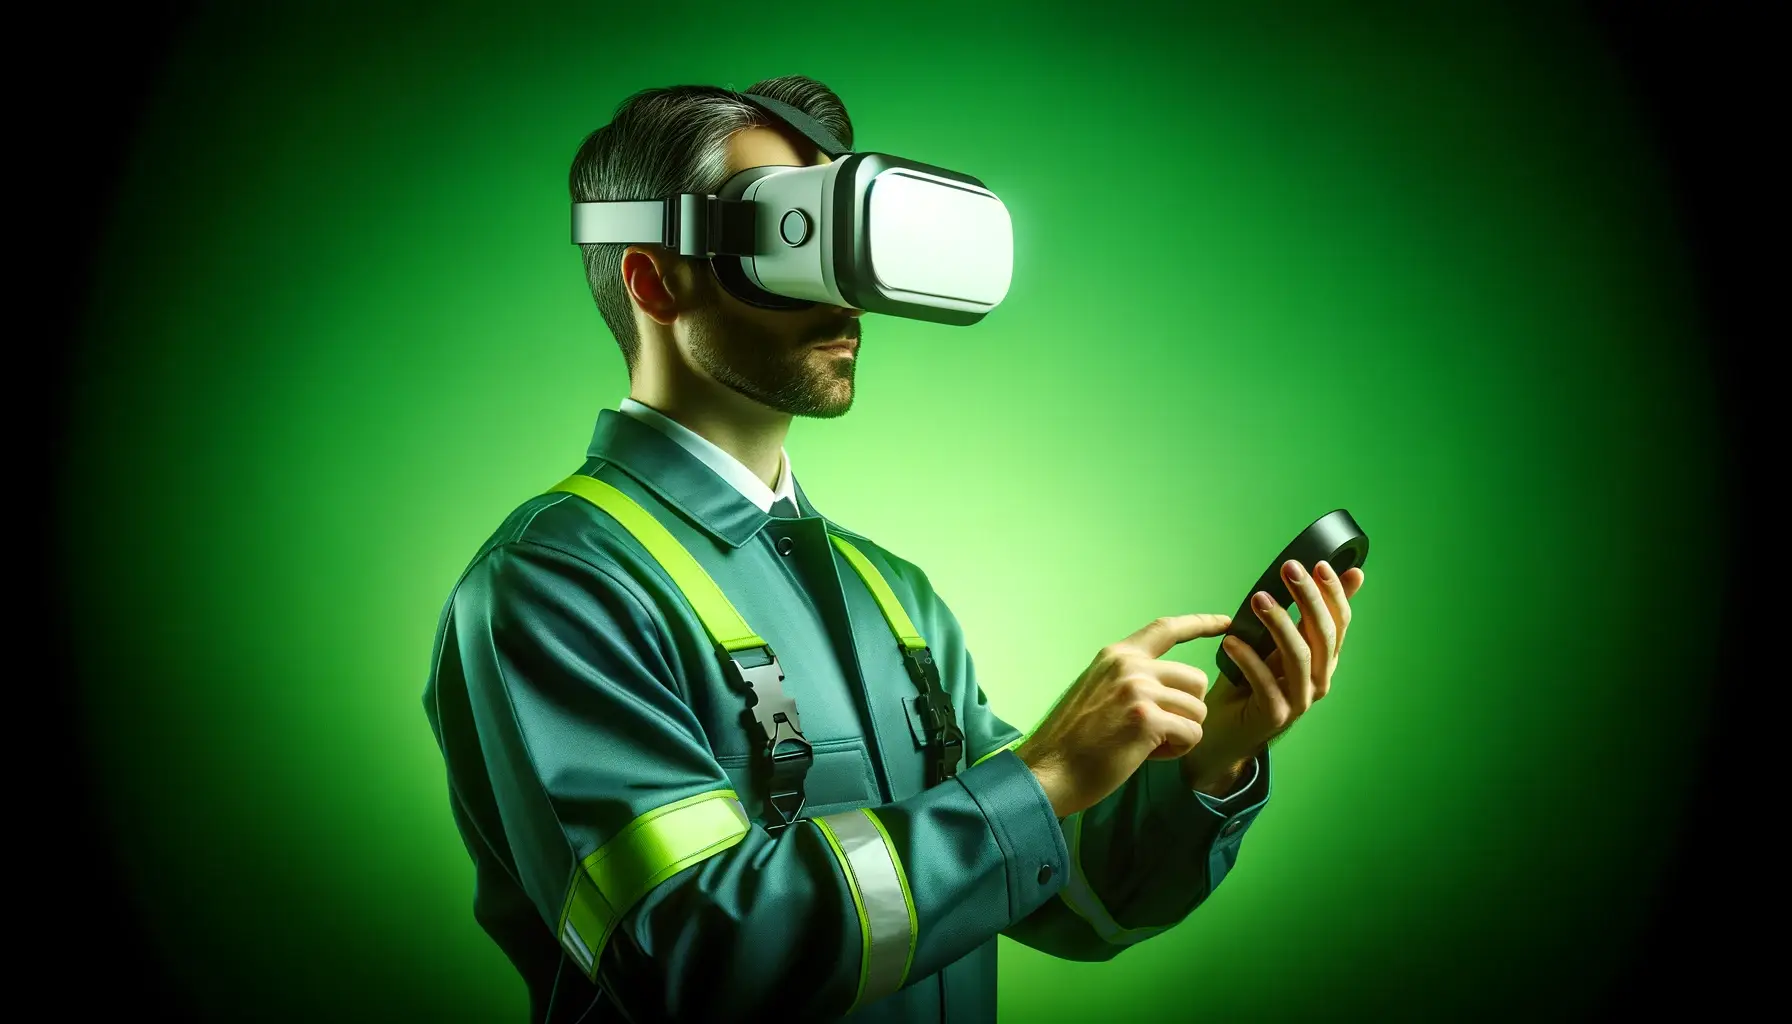 A tech-savvy facility manager with AR/VR headsets against a pure green background